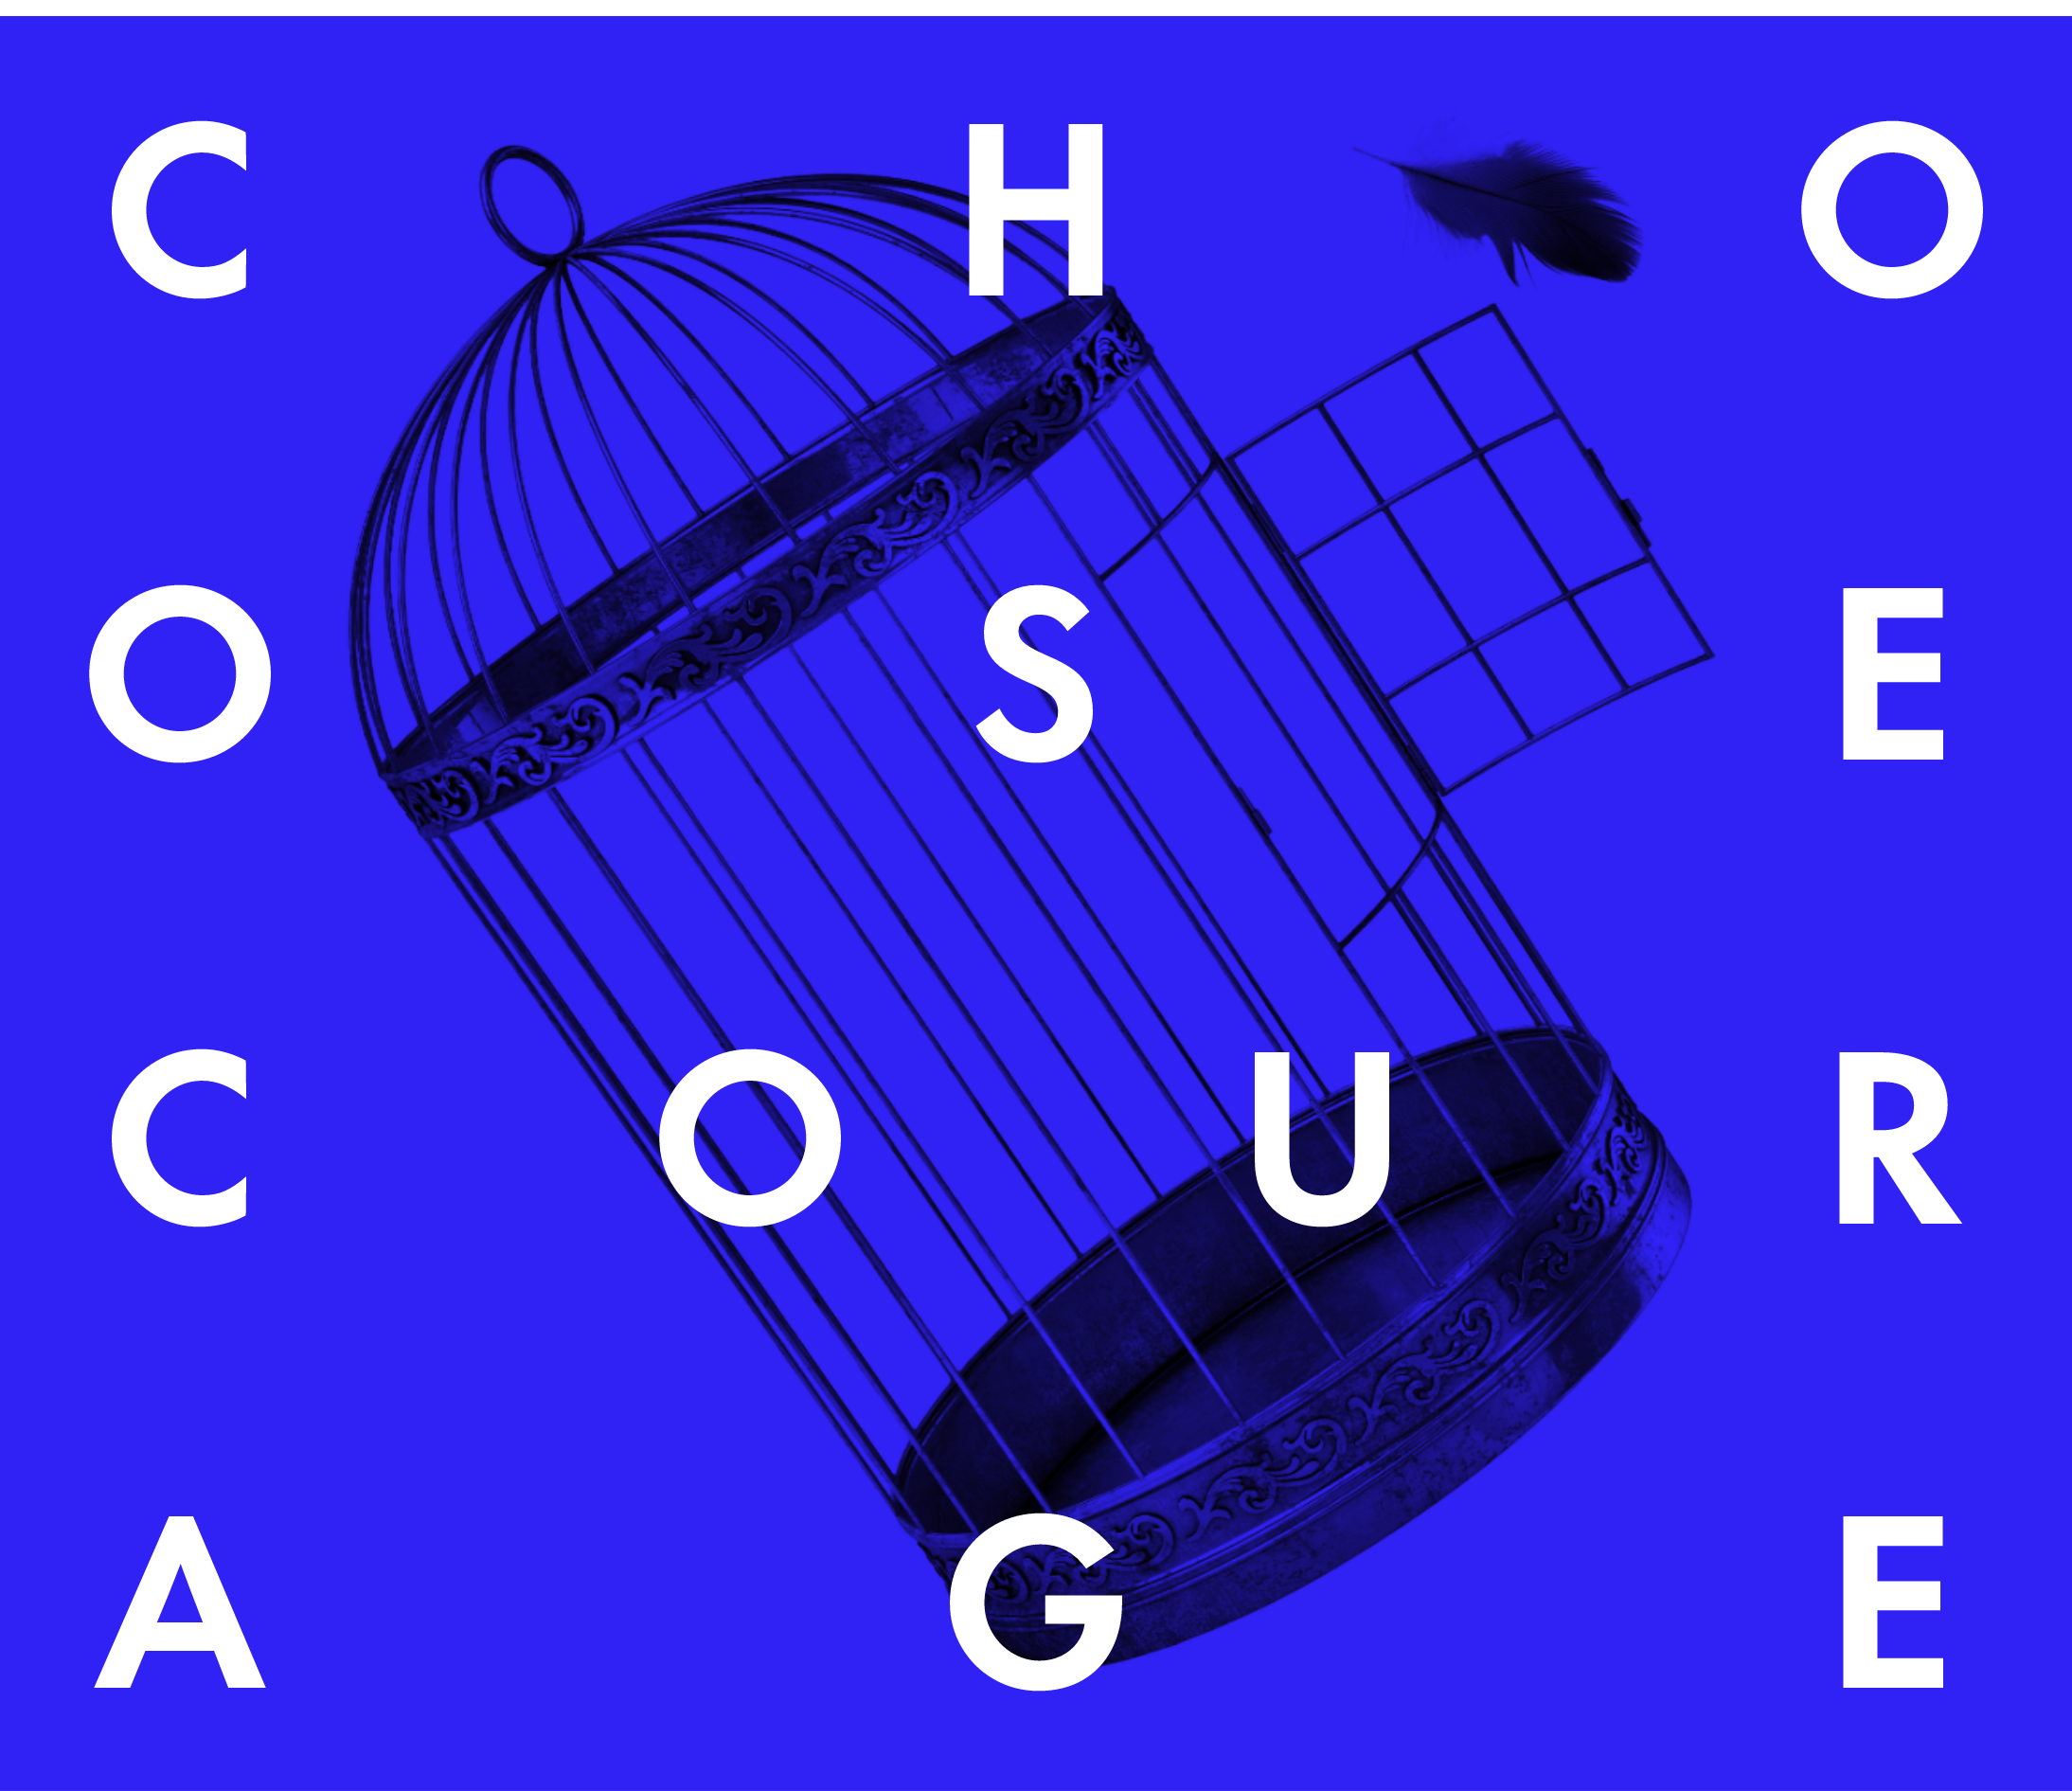 The words 'Choose Courage' in white bold text over the illustration of a black birdcage tipping over to the left.